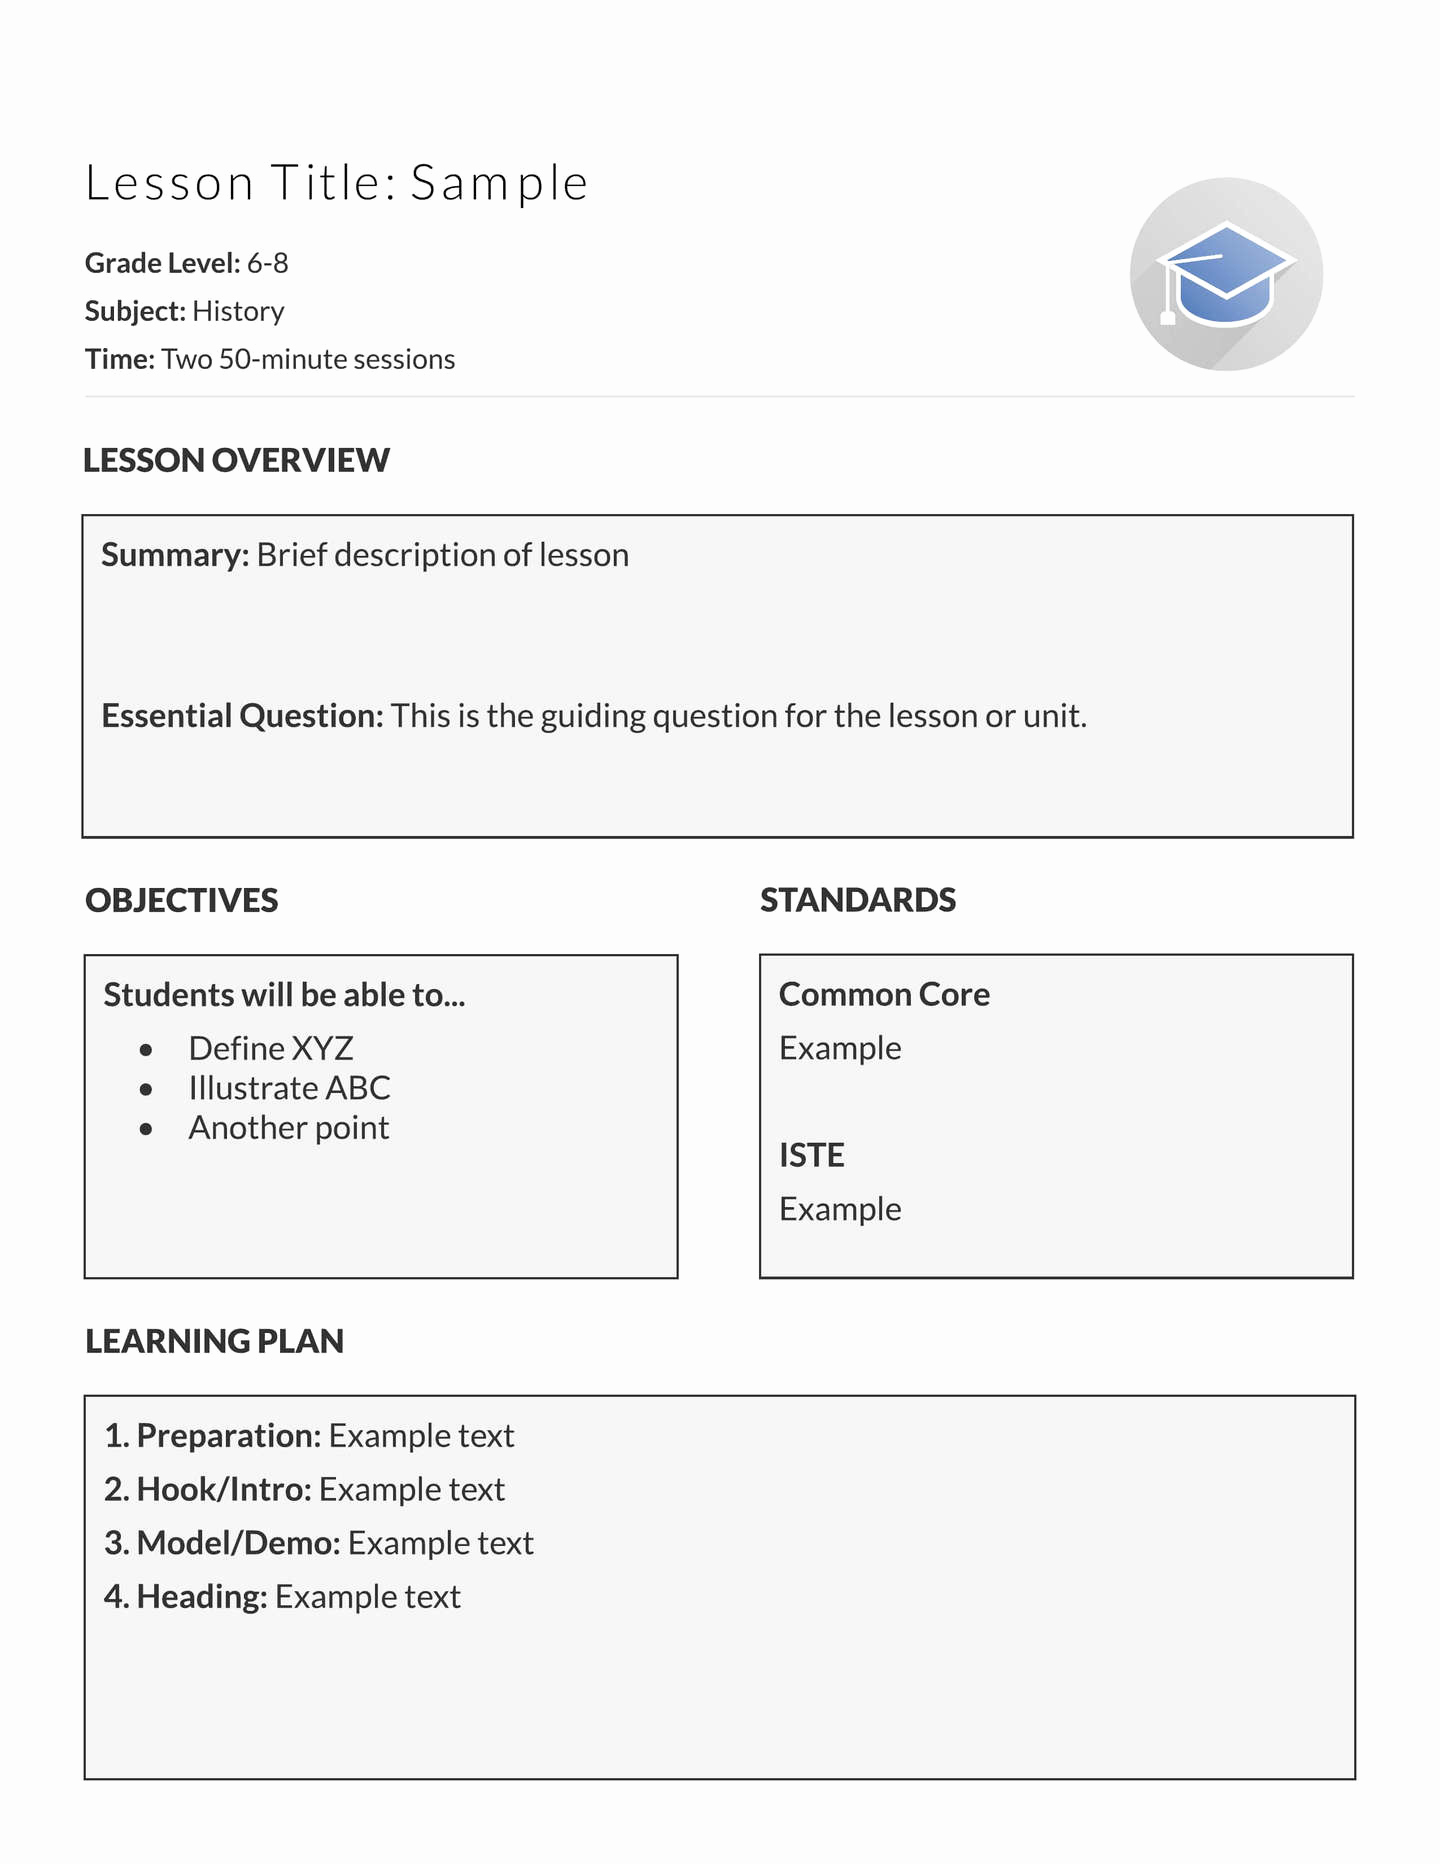 Lesson Plan Template Free Awesome 5 Free Lesson Plan Templates &amp; Examples Lucidpress